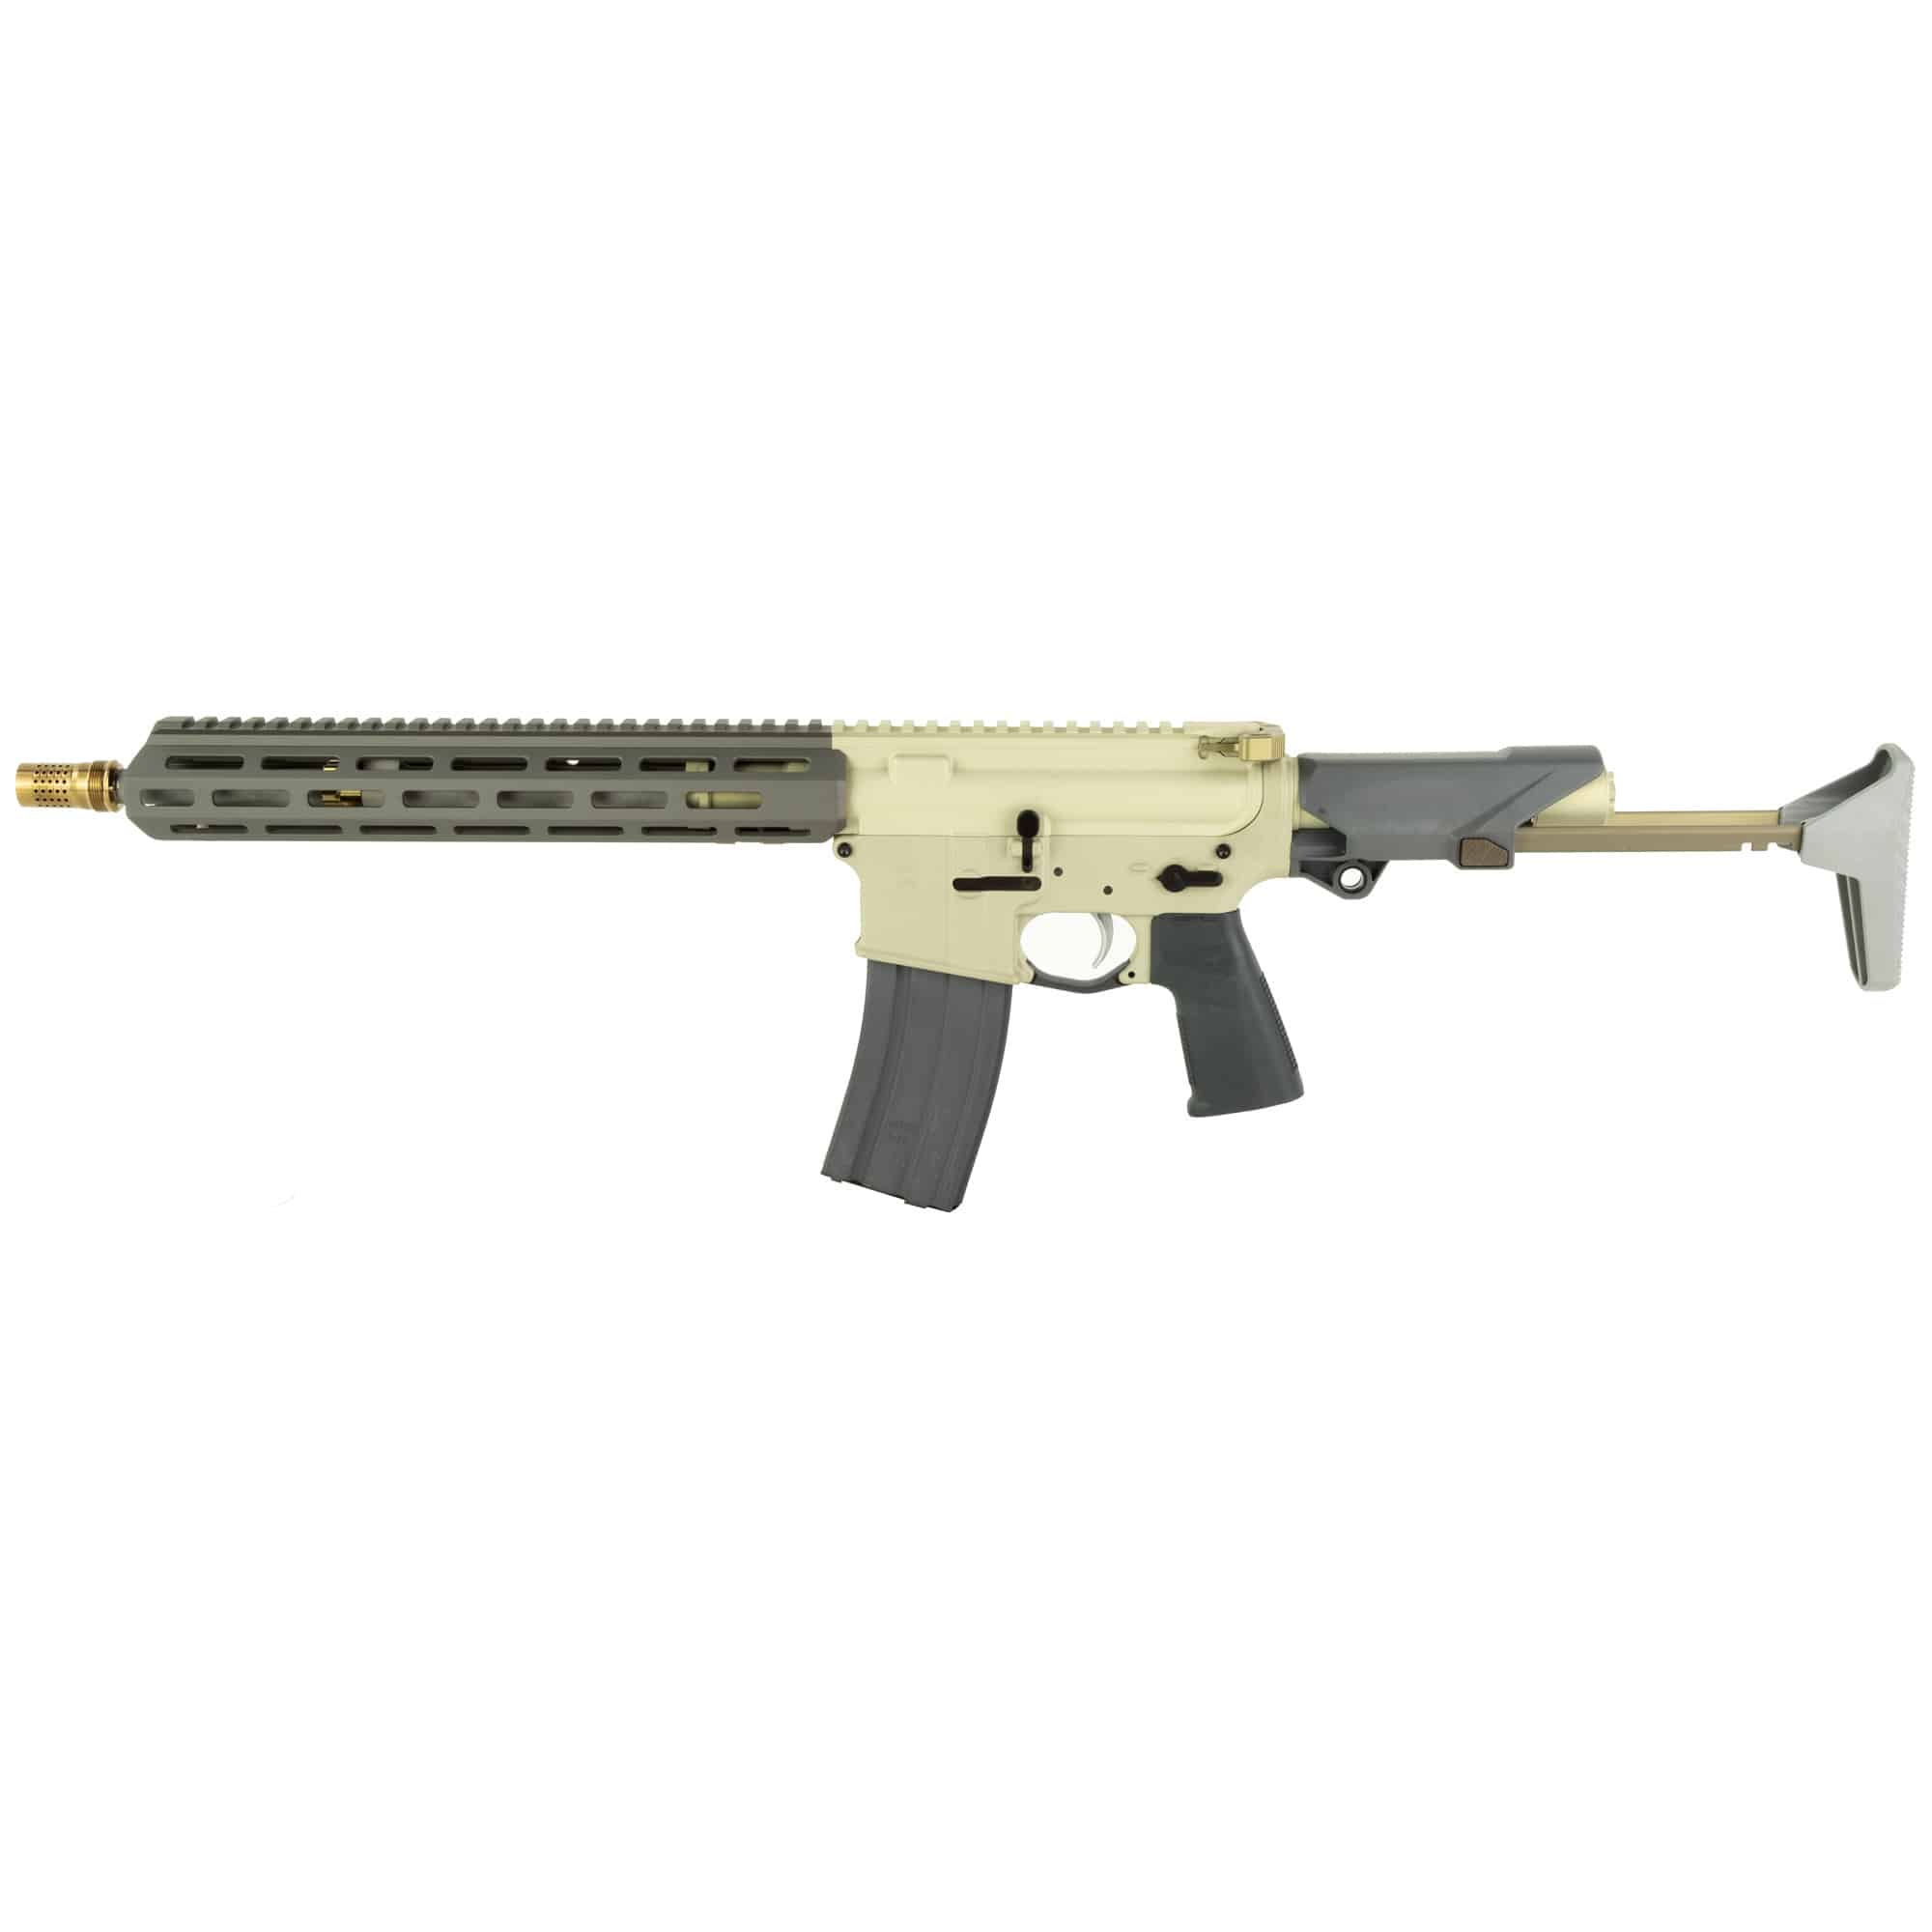 https://cityarsenal.com/product/q-sugar-weasel-5-56-nato-13-in-17-twist-sbr-with-shorty-stock-gray-accents-sw-556-13in-shorty/